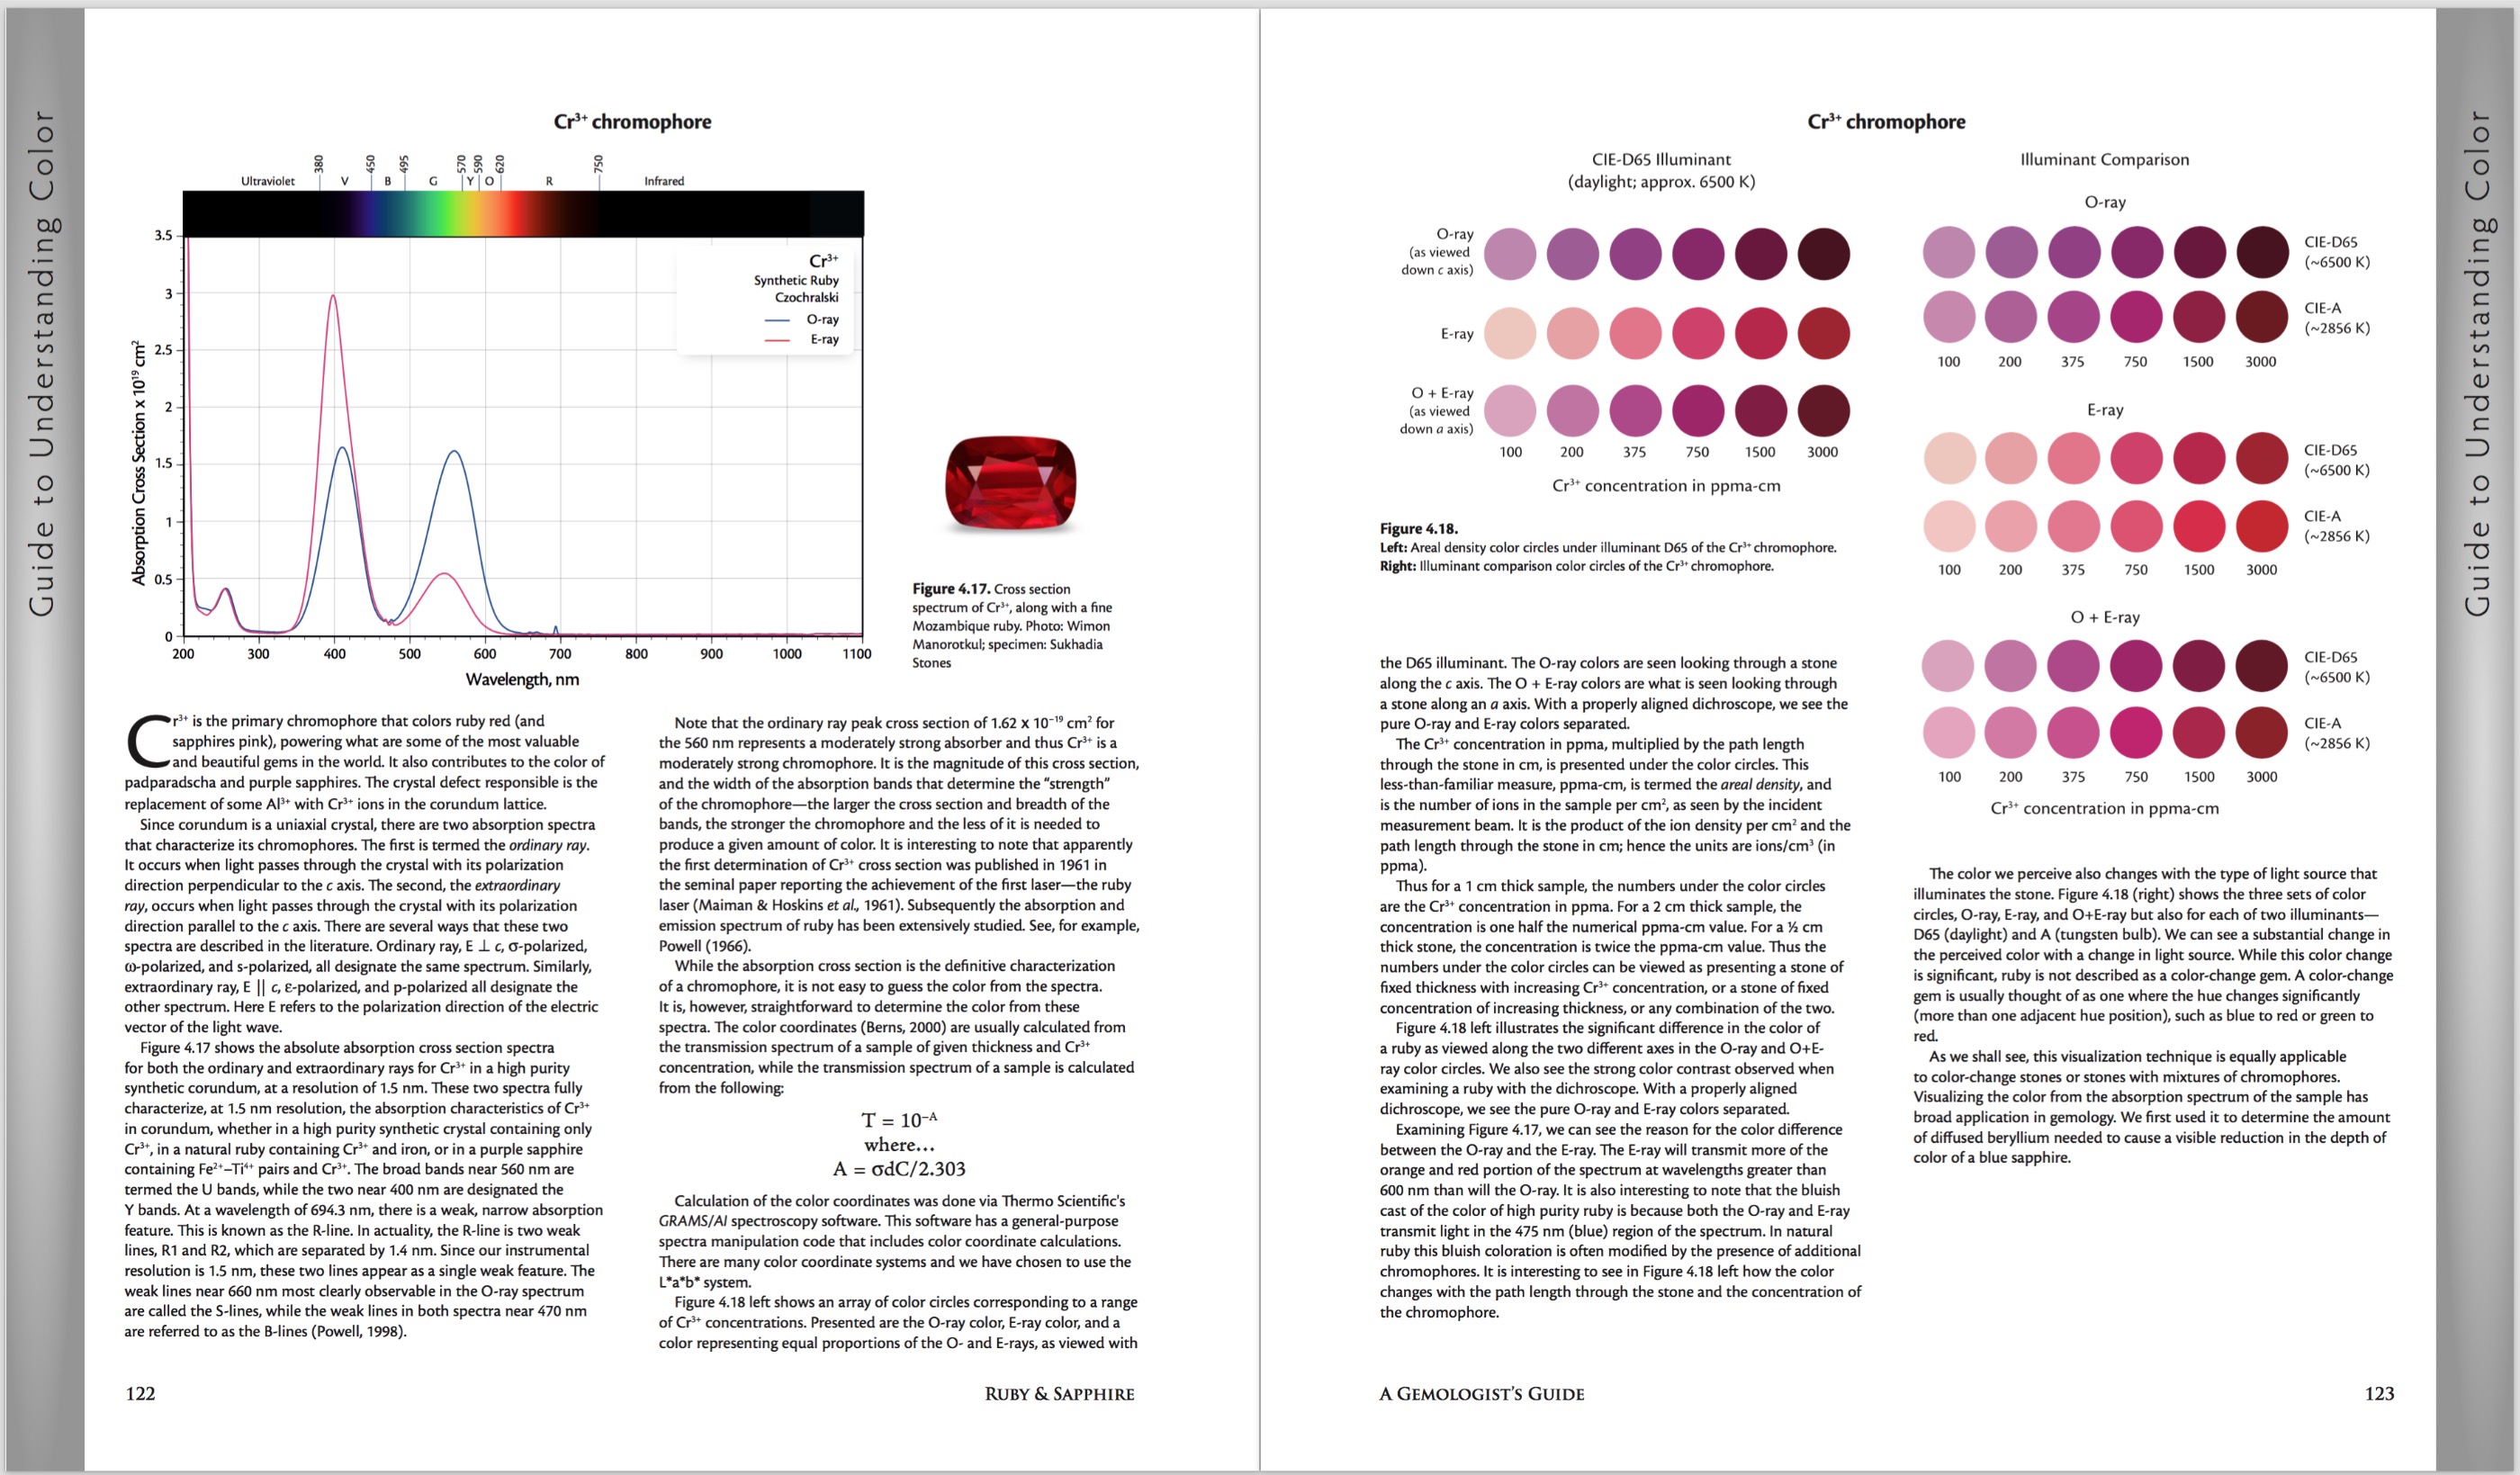 Ruby & Sapphire: A Gemologist's Guide – Color, Spectra & Luminescence